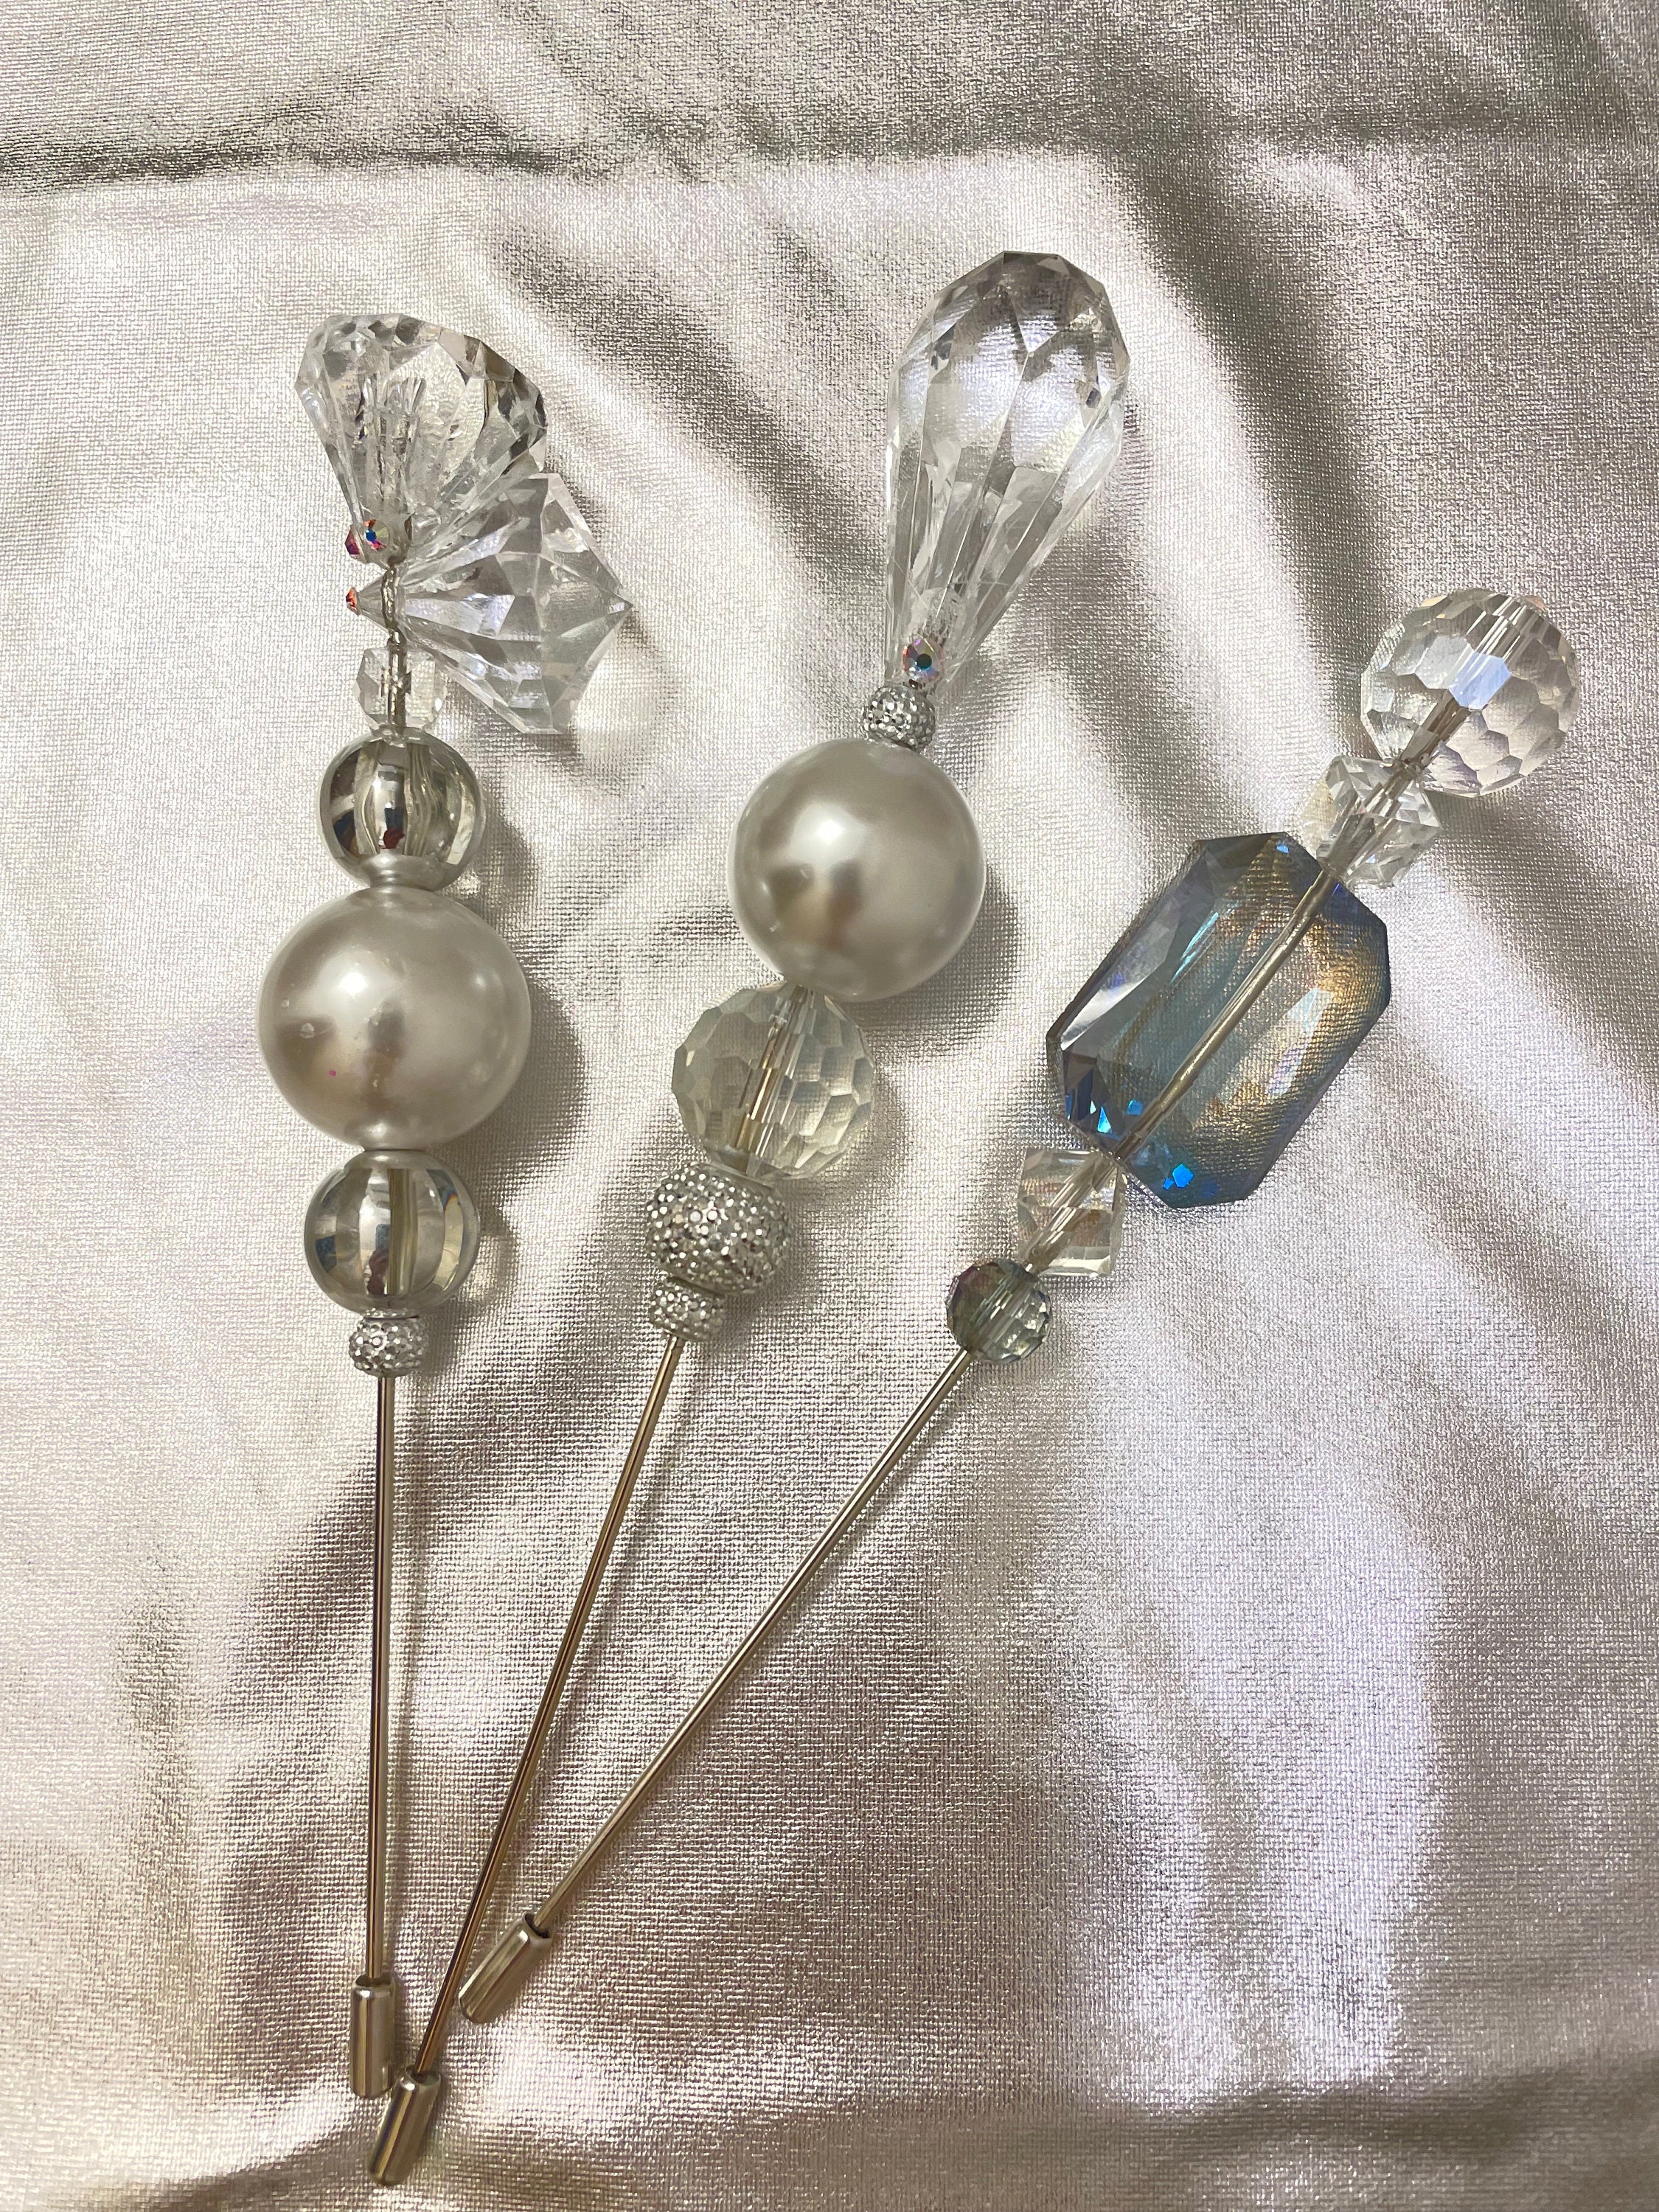 Stunning ladies hat pins for Decor and Souvenirs 